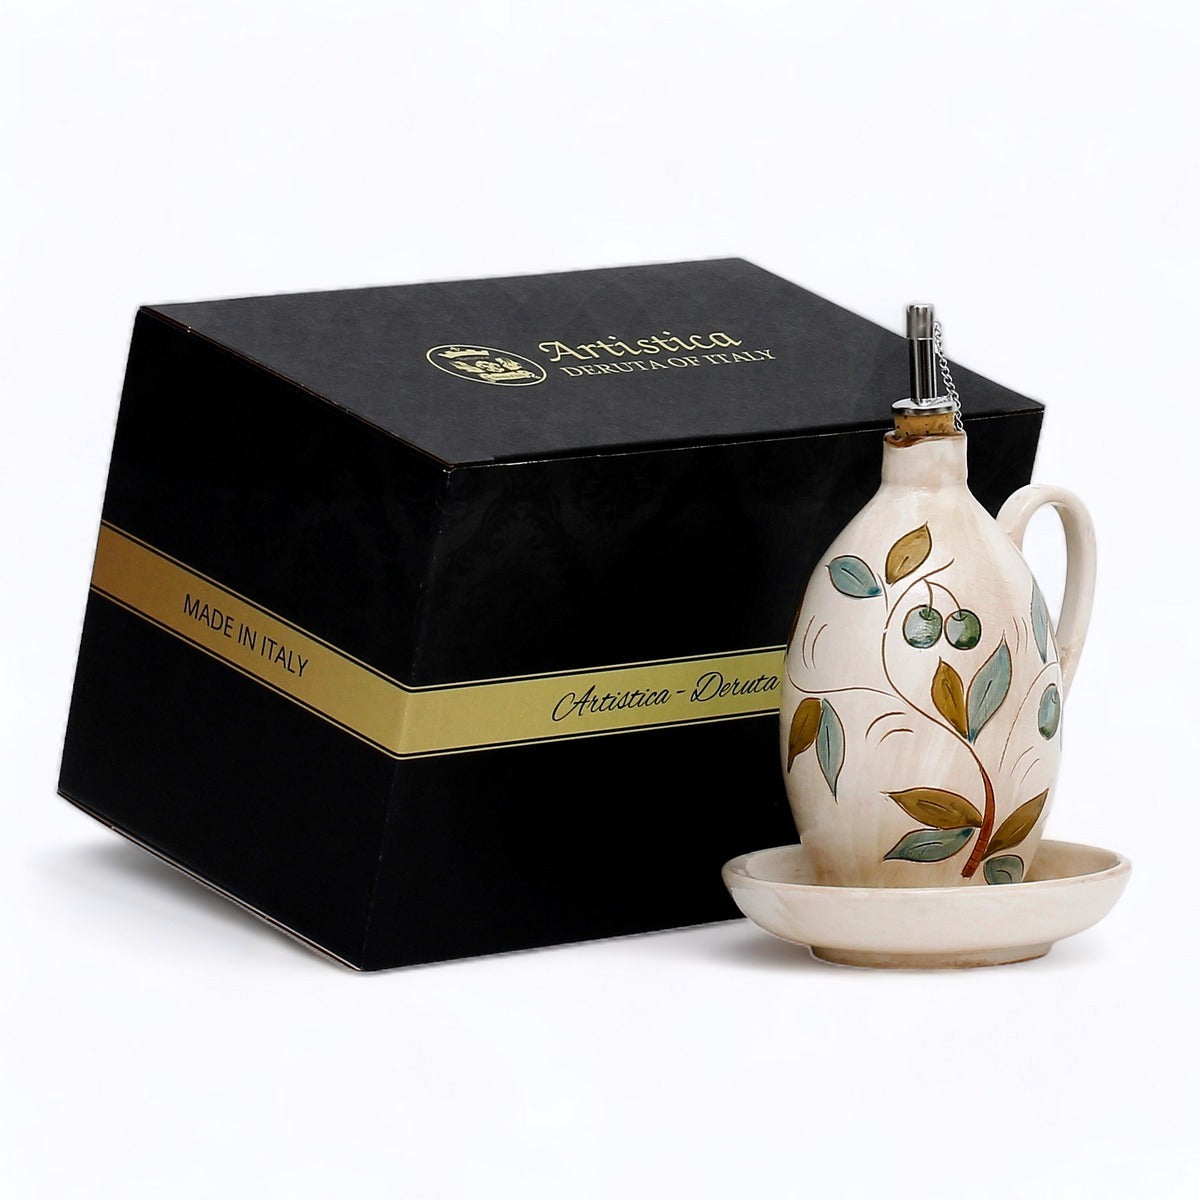 GIFT BOX: With authentic Deruta hand painted ceramic - Olive Oil Dispenser Bottle with Saucer/Dipping Bowl